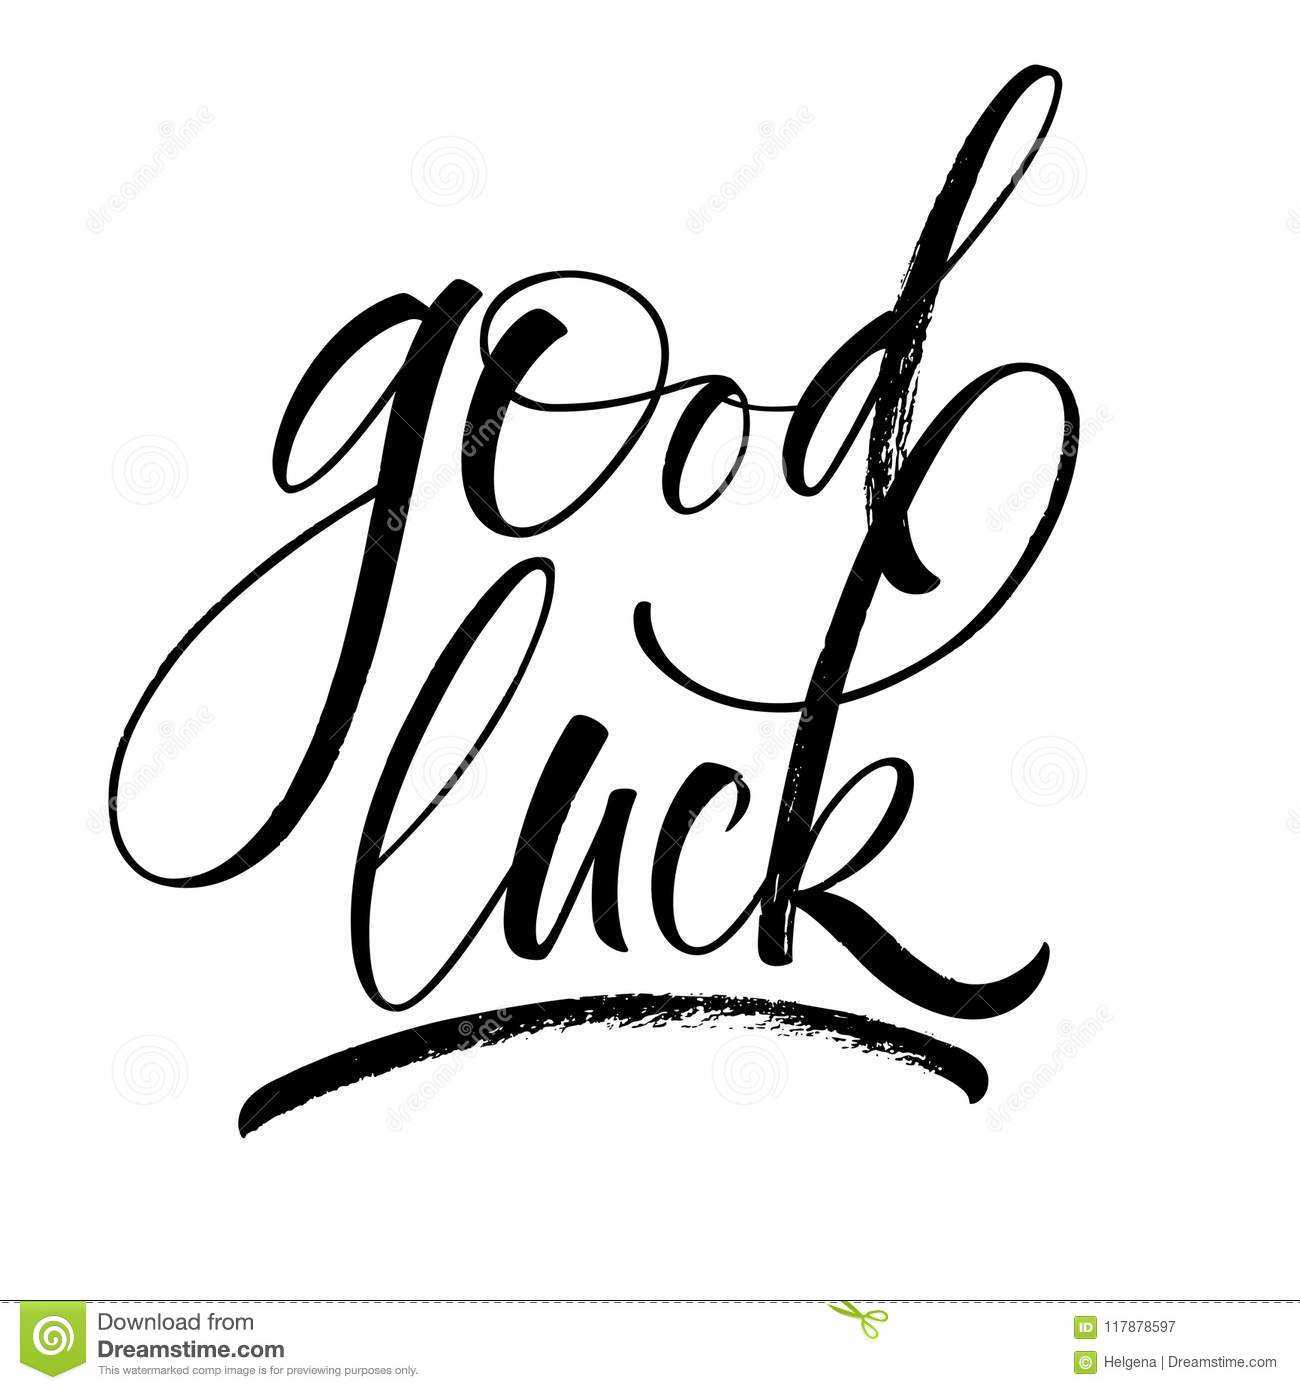 Good Luck Lettering Stock Vector. Illustration Of Best With Good Luck Banner Template